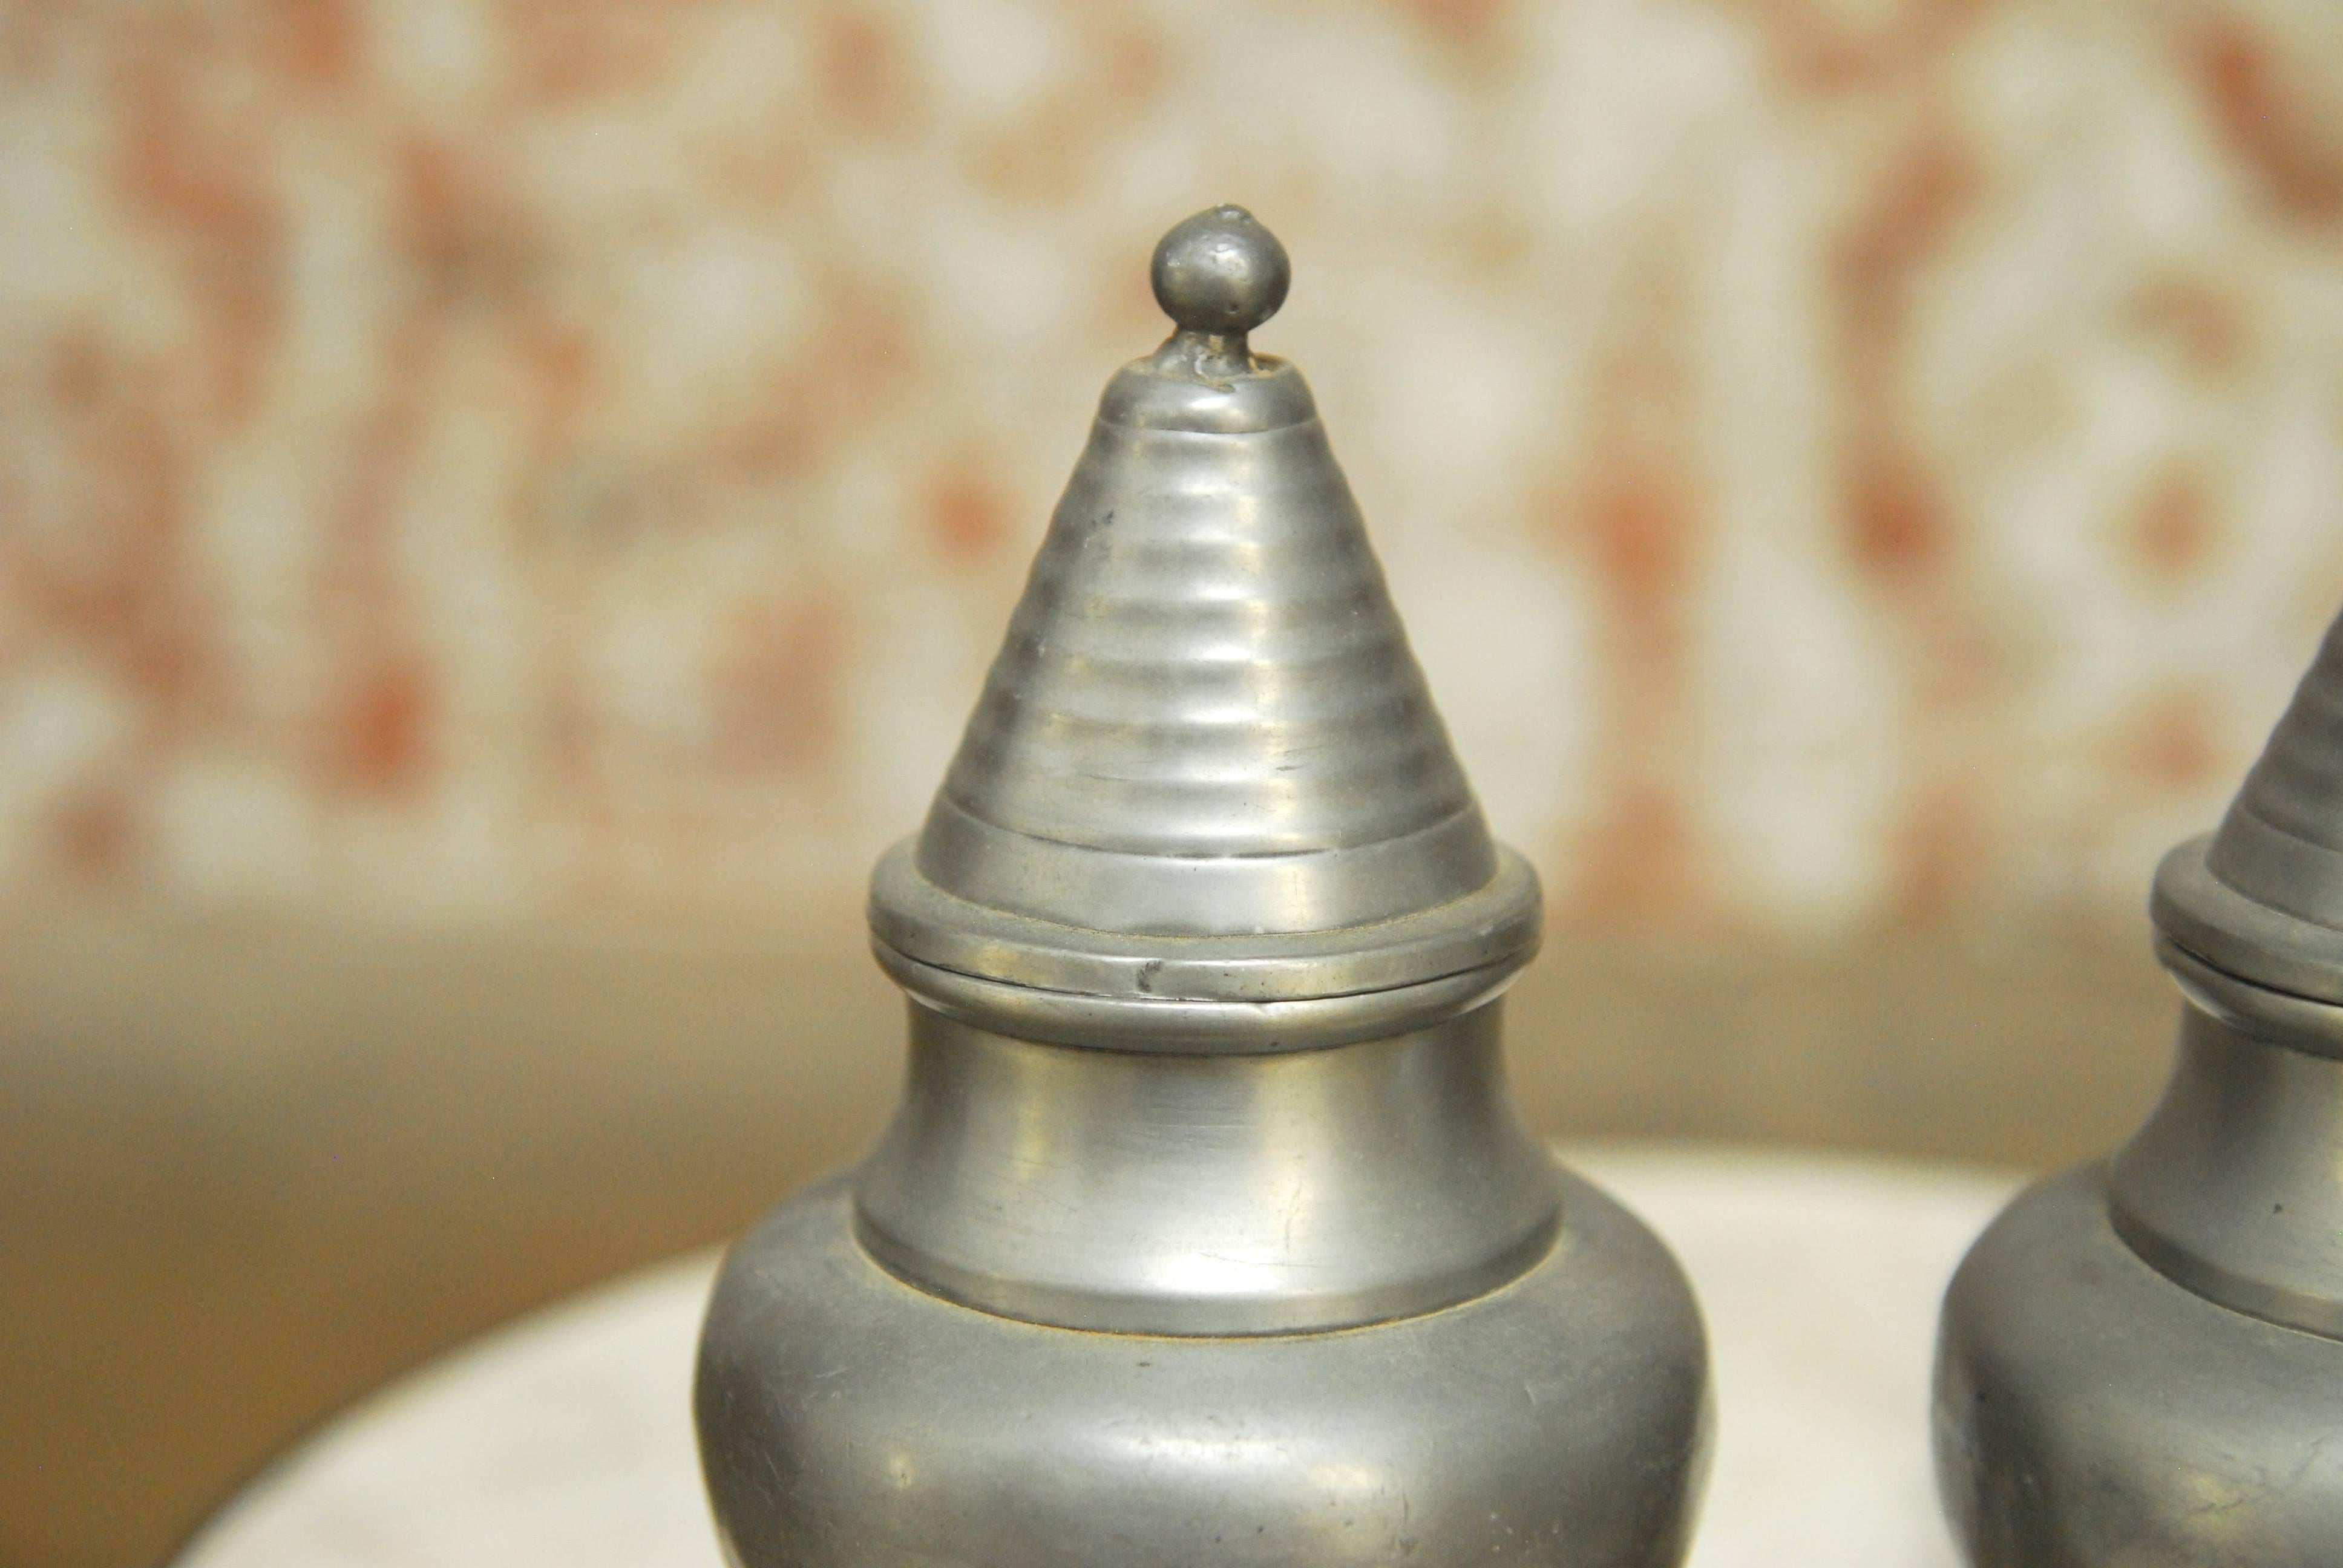 Charming pair of diminutive Chinese pewter lidded urns or vases featuring a turned finish with bell finials. Great for decoration, storage, or both. Minor dents consistent with age and use.
 